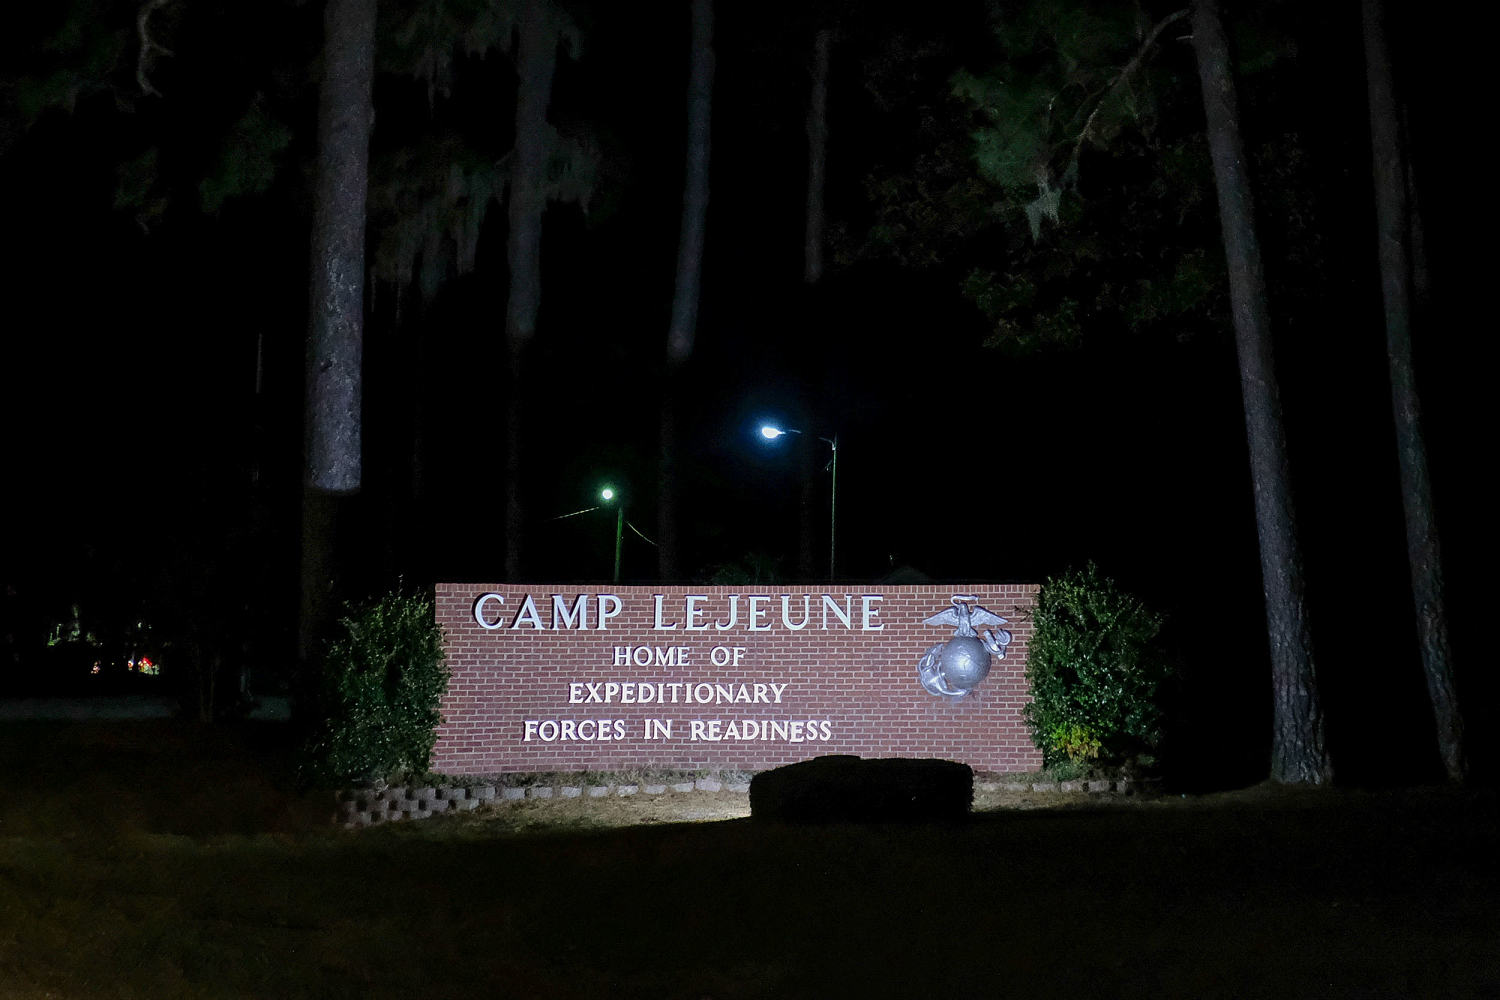 Marine in custody in suspected homicide of another Marine at Camp Lejeune base